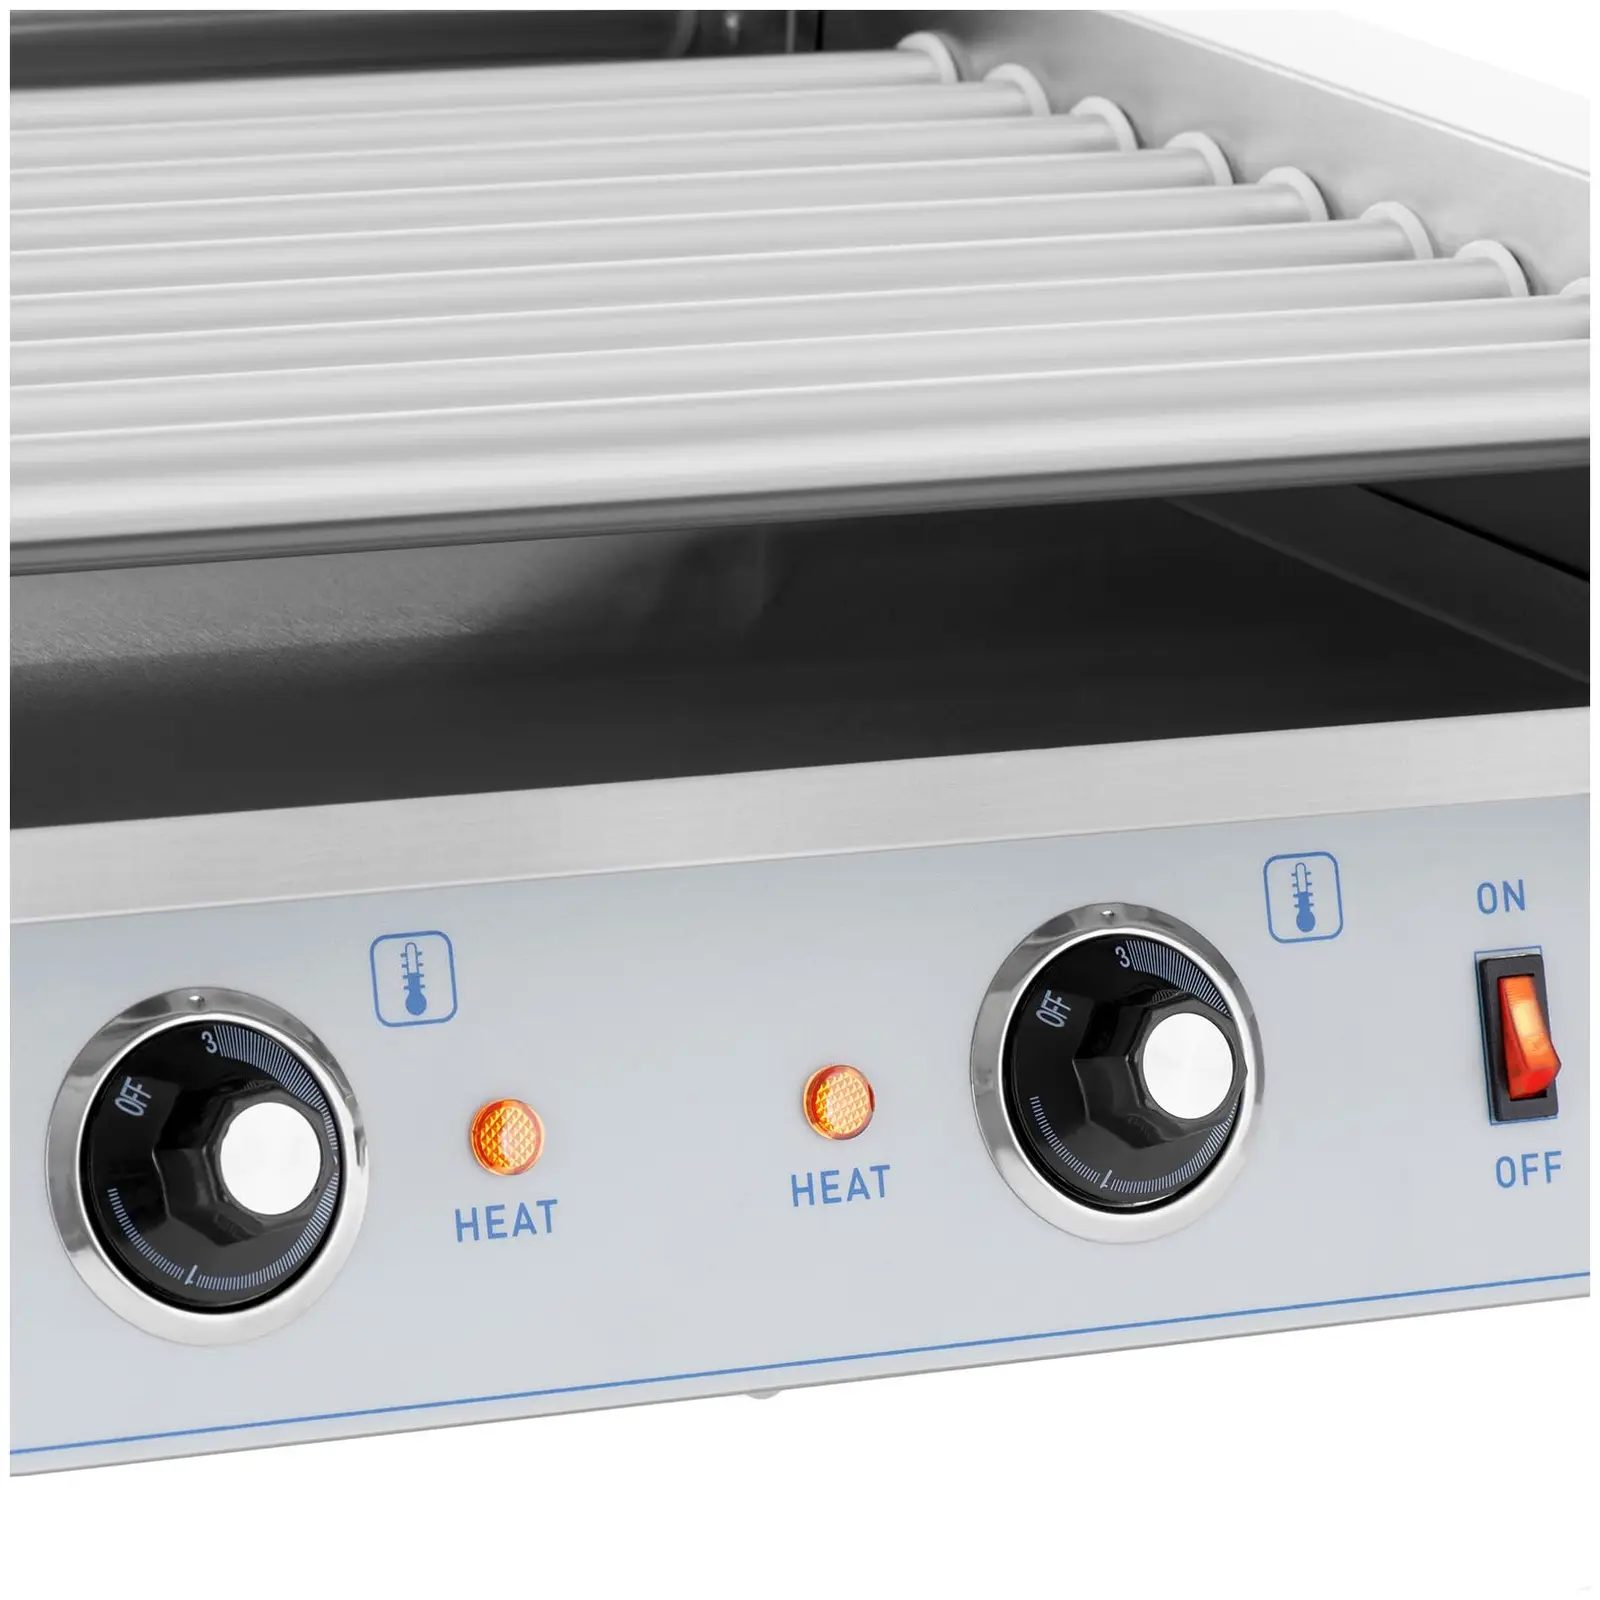 Hot Dog Grill - 9 rollers - Royal Catering - stainless steel